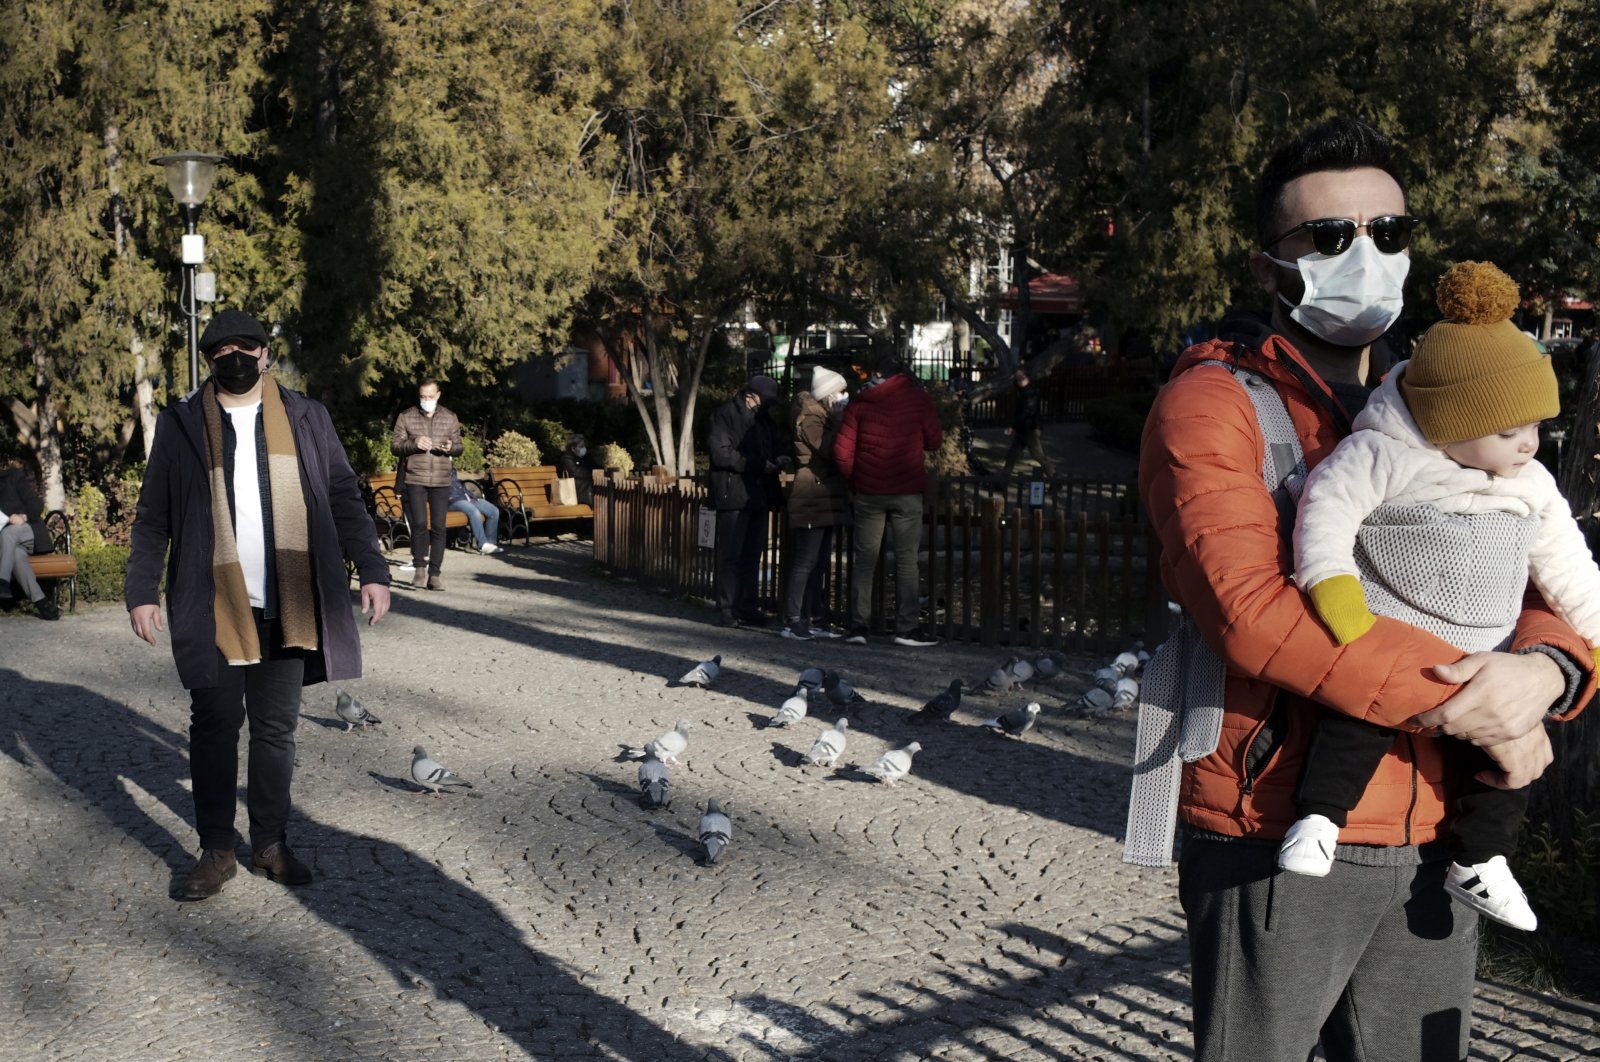 People wearing masks to help protect against the spread of coronavirus, visit a public garden in the capital Ankara, Turkey, Nov. 27, 2020. (AP Photo)